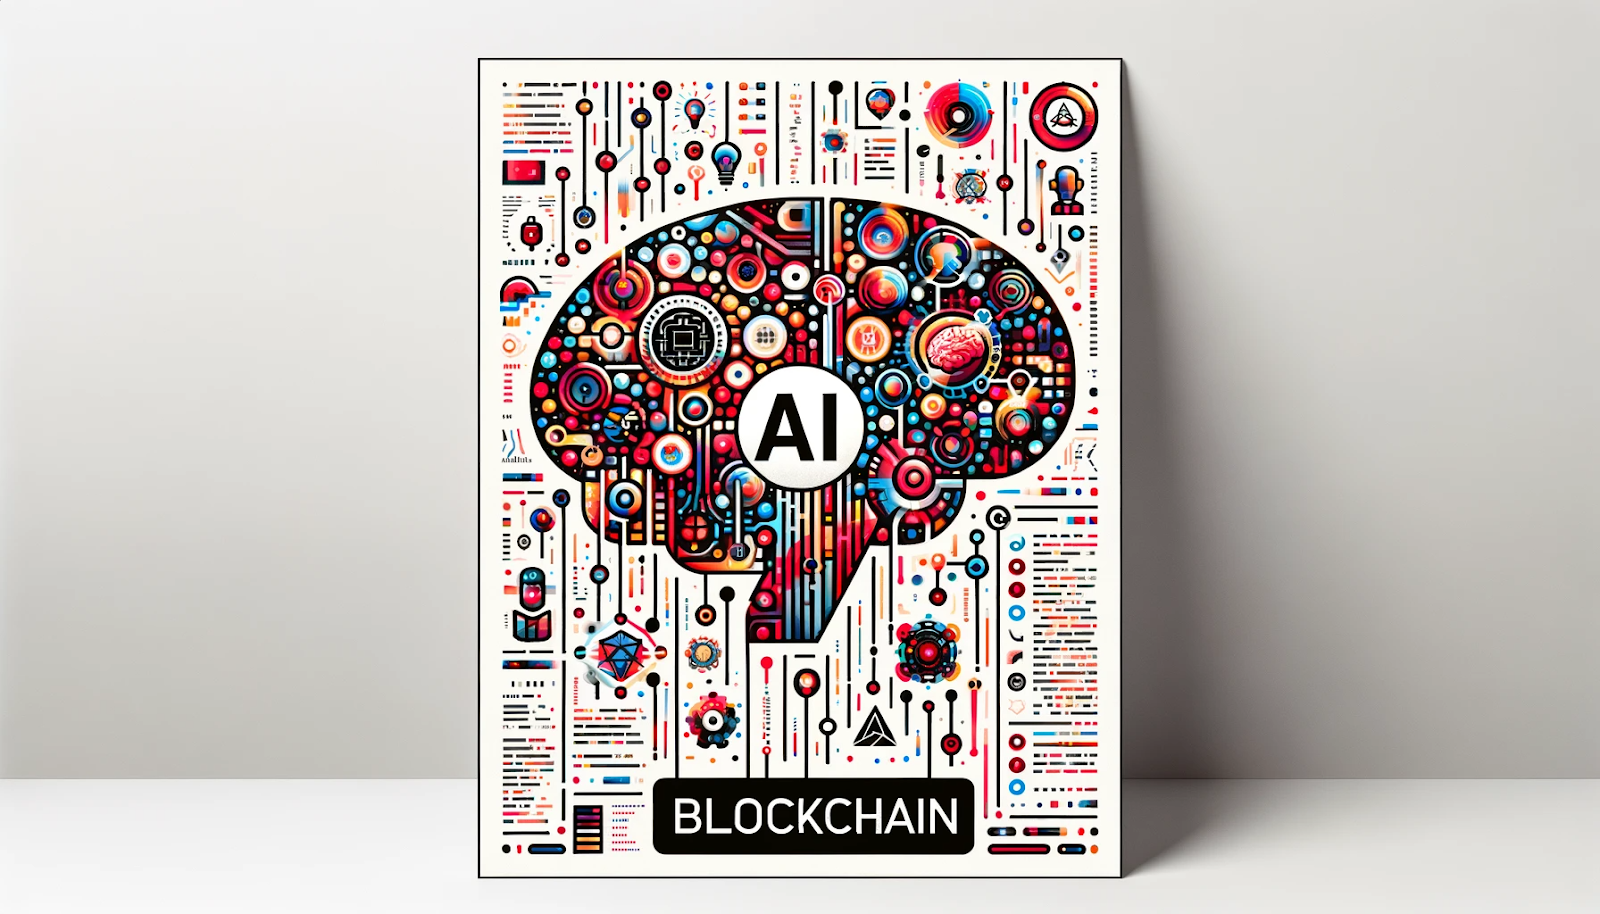 Revolutionizing the Digital World: How AI Blockchain is Changing Everything